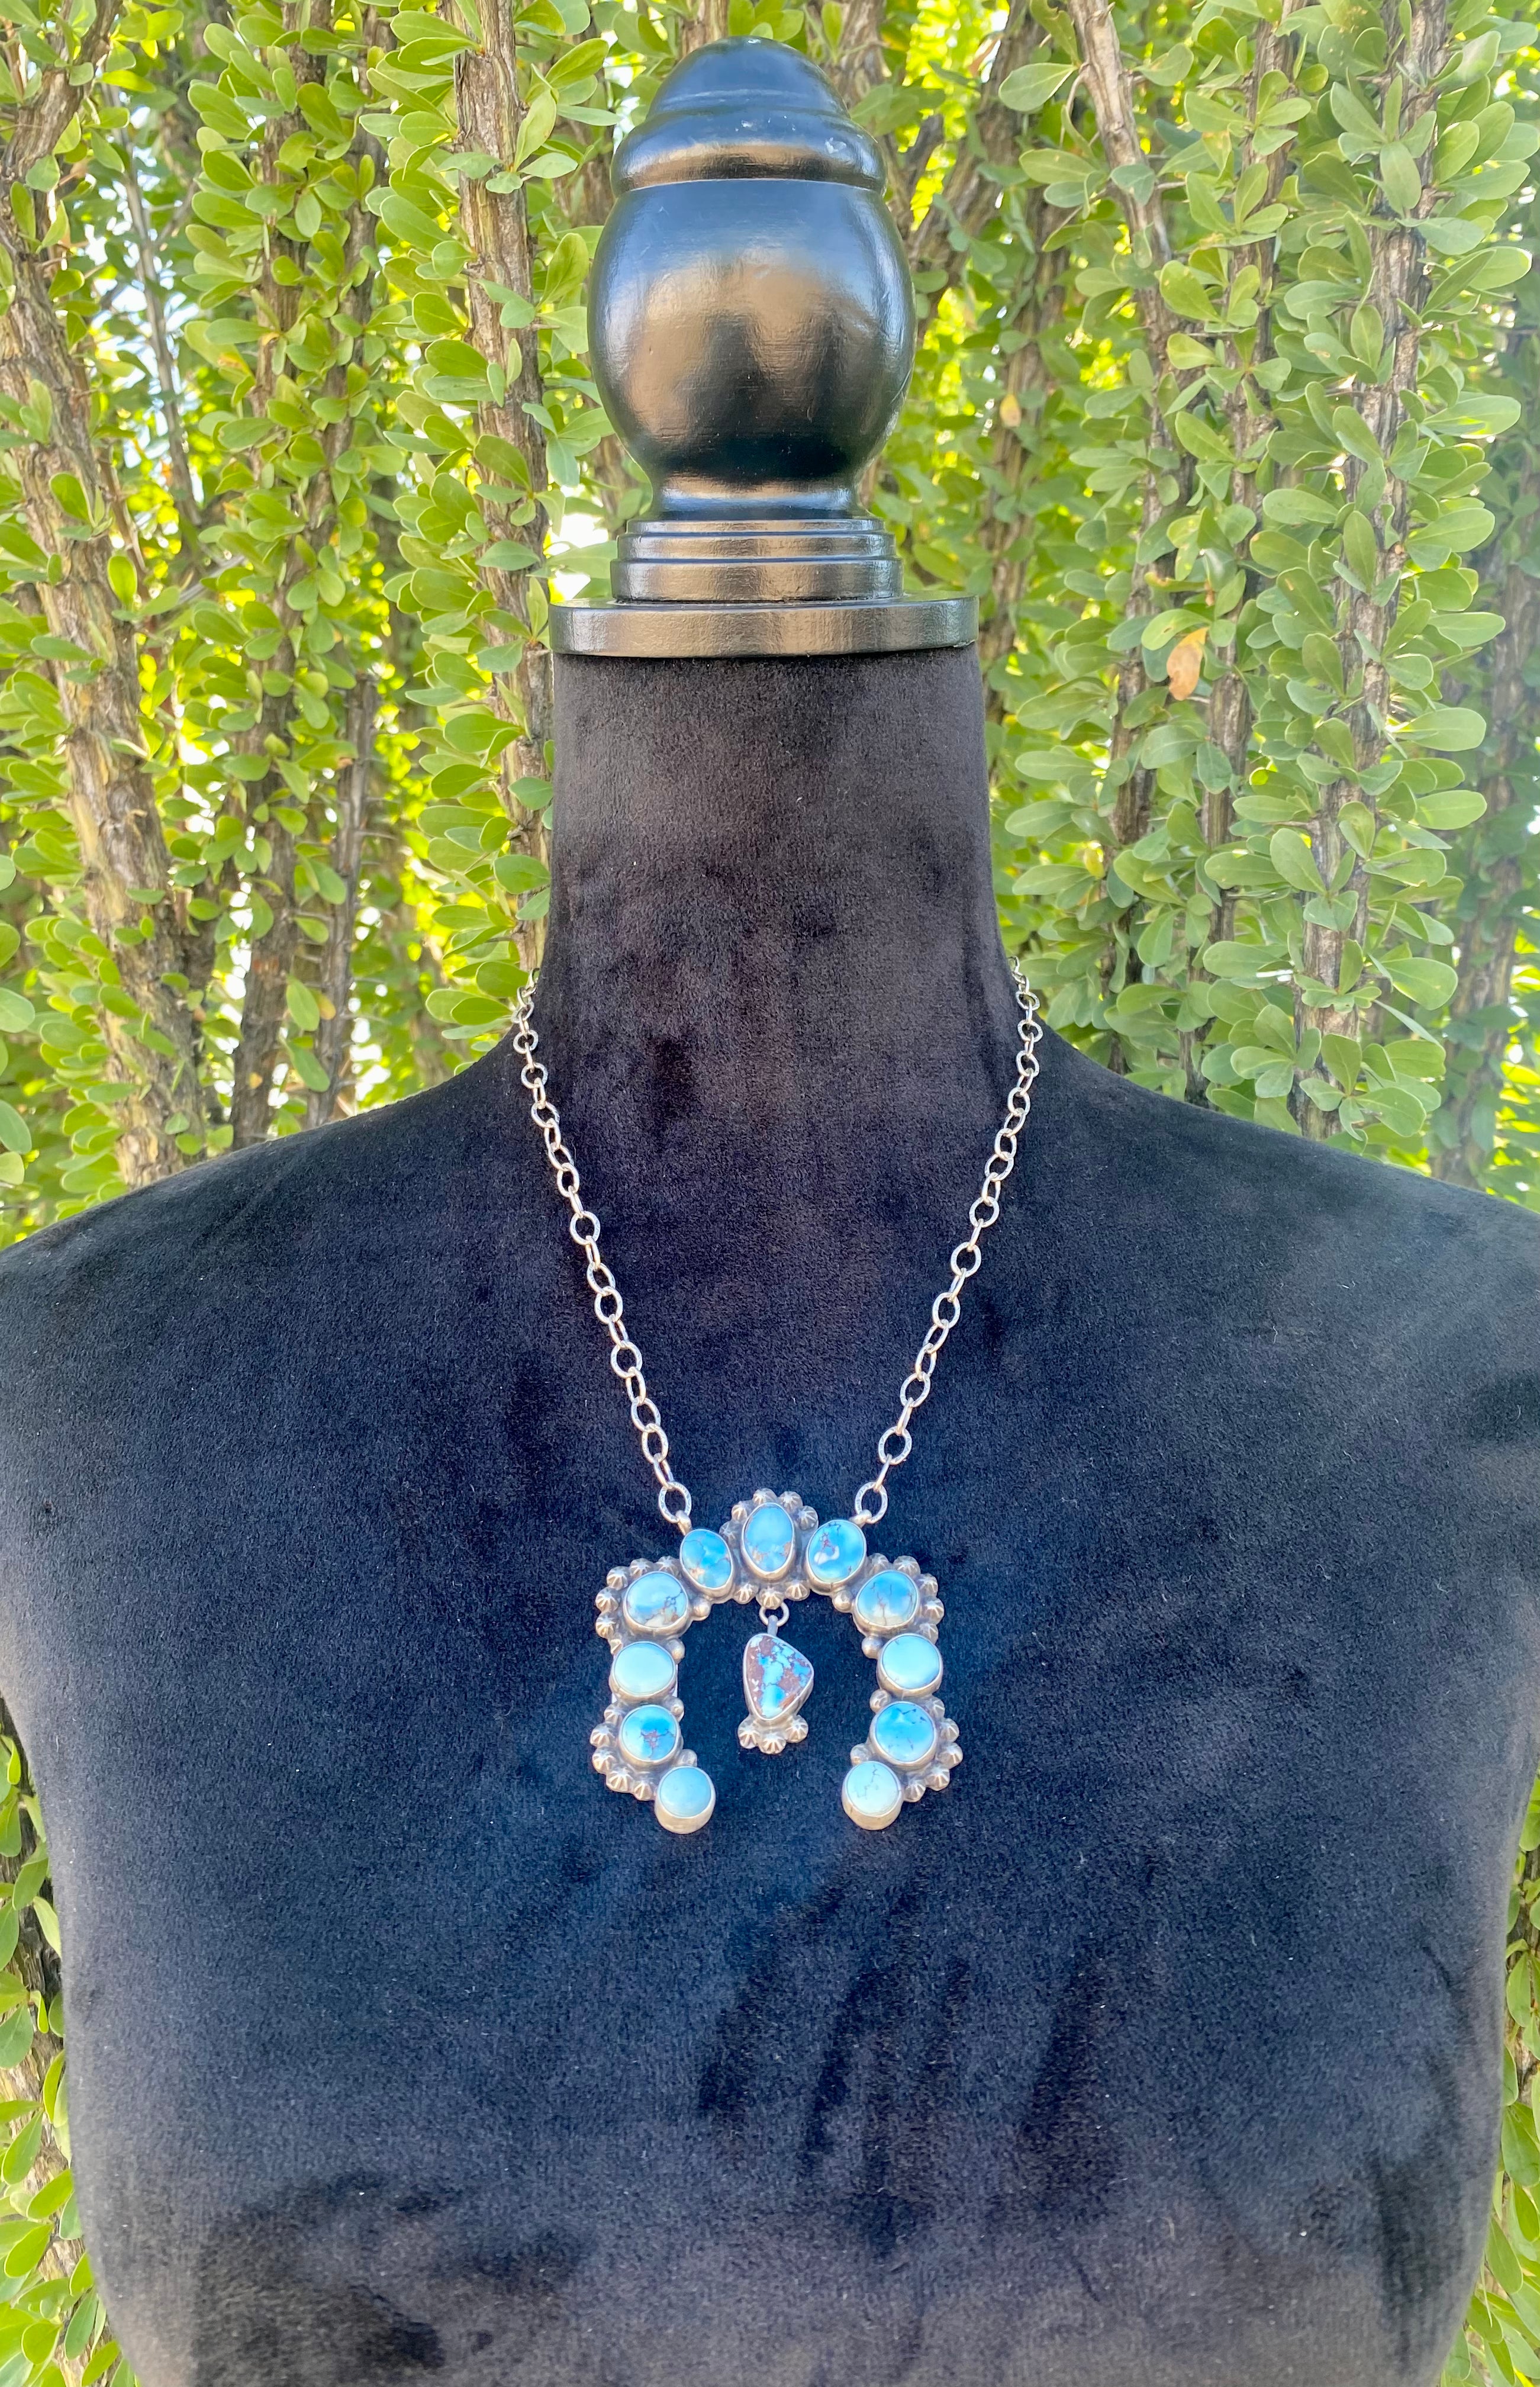 Marie Tsosie Golden Hill’s Turquoise & Sterling Silver Naja Necklace